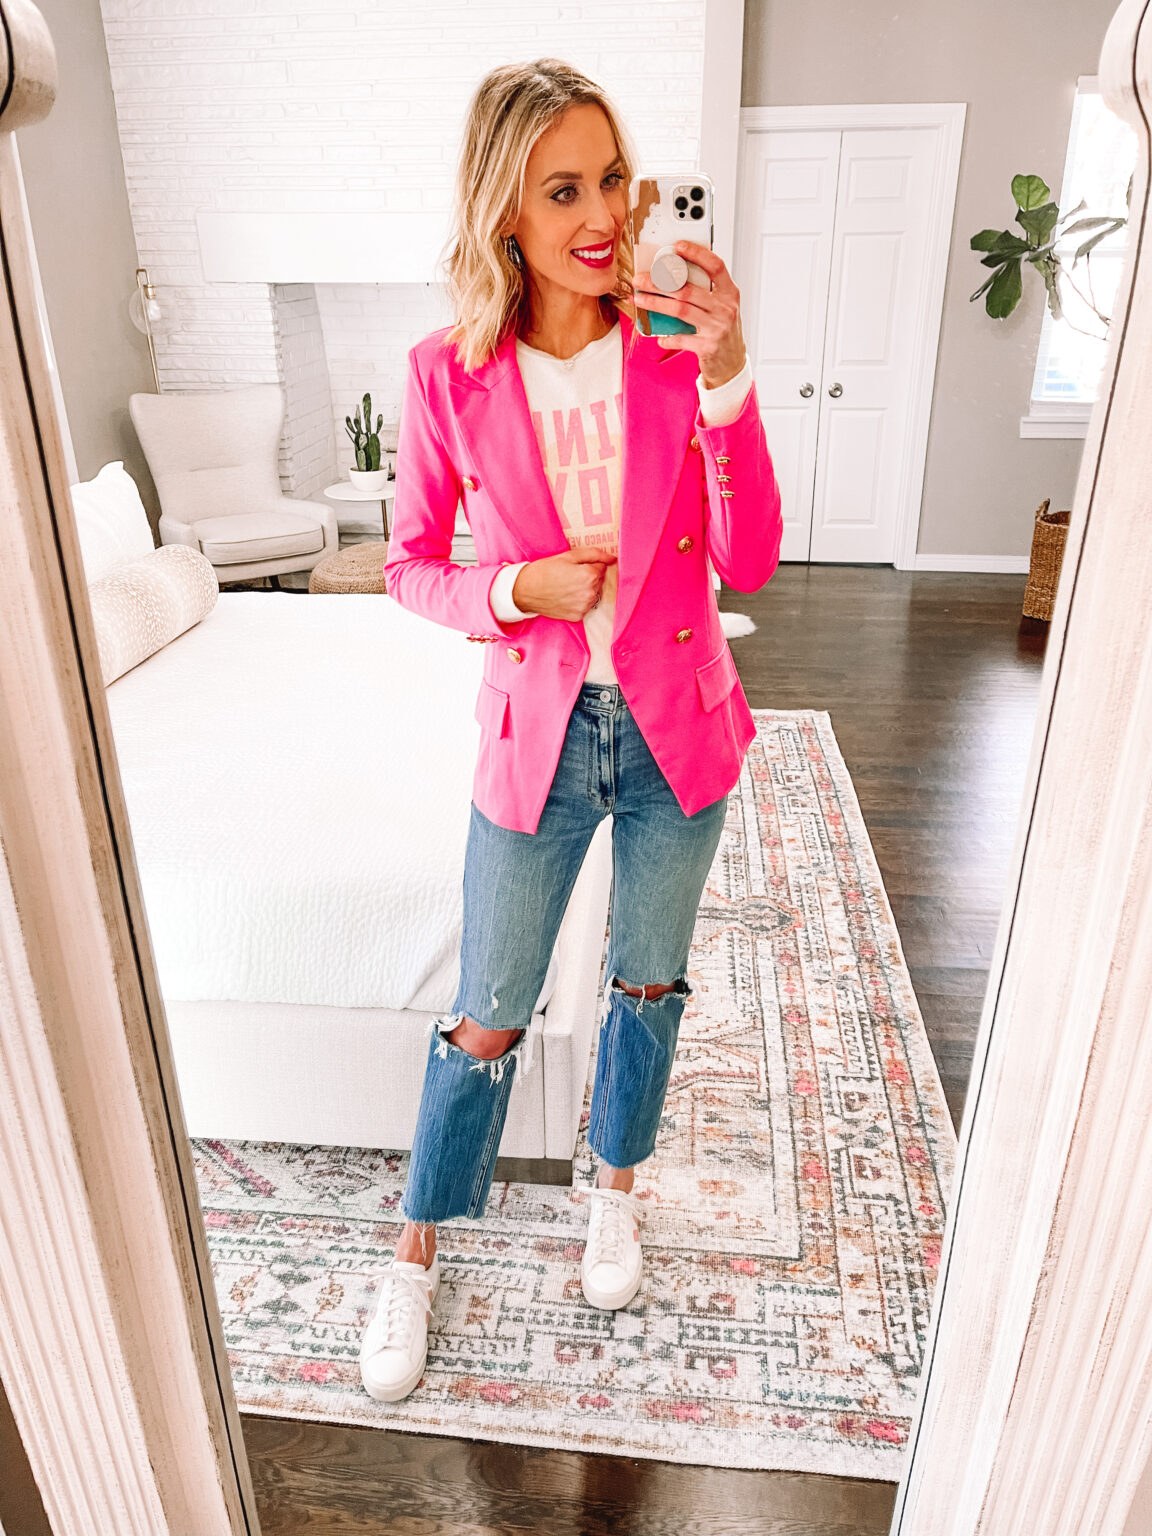 How to Wear a Pink Blazer - 8 Styling Ideas - Straight A Style